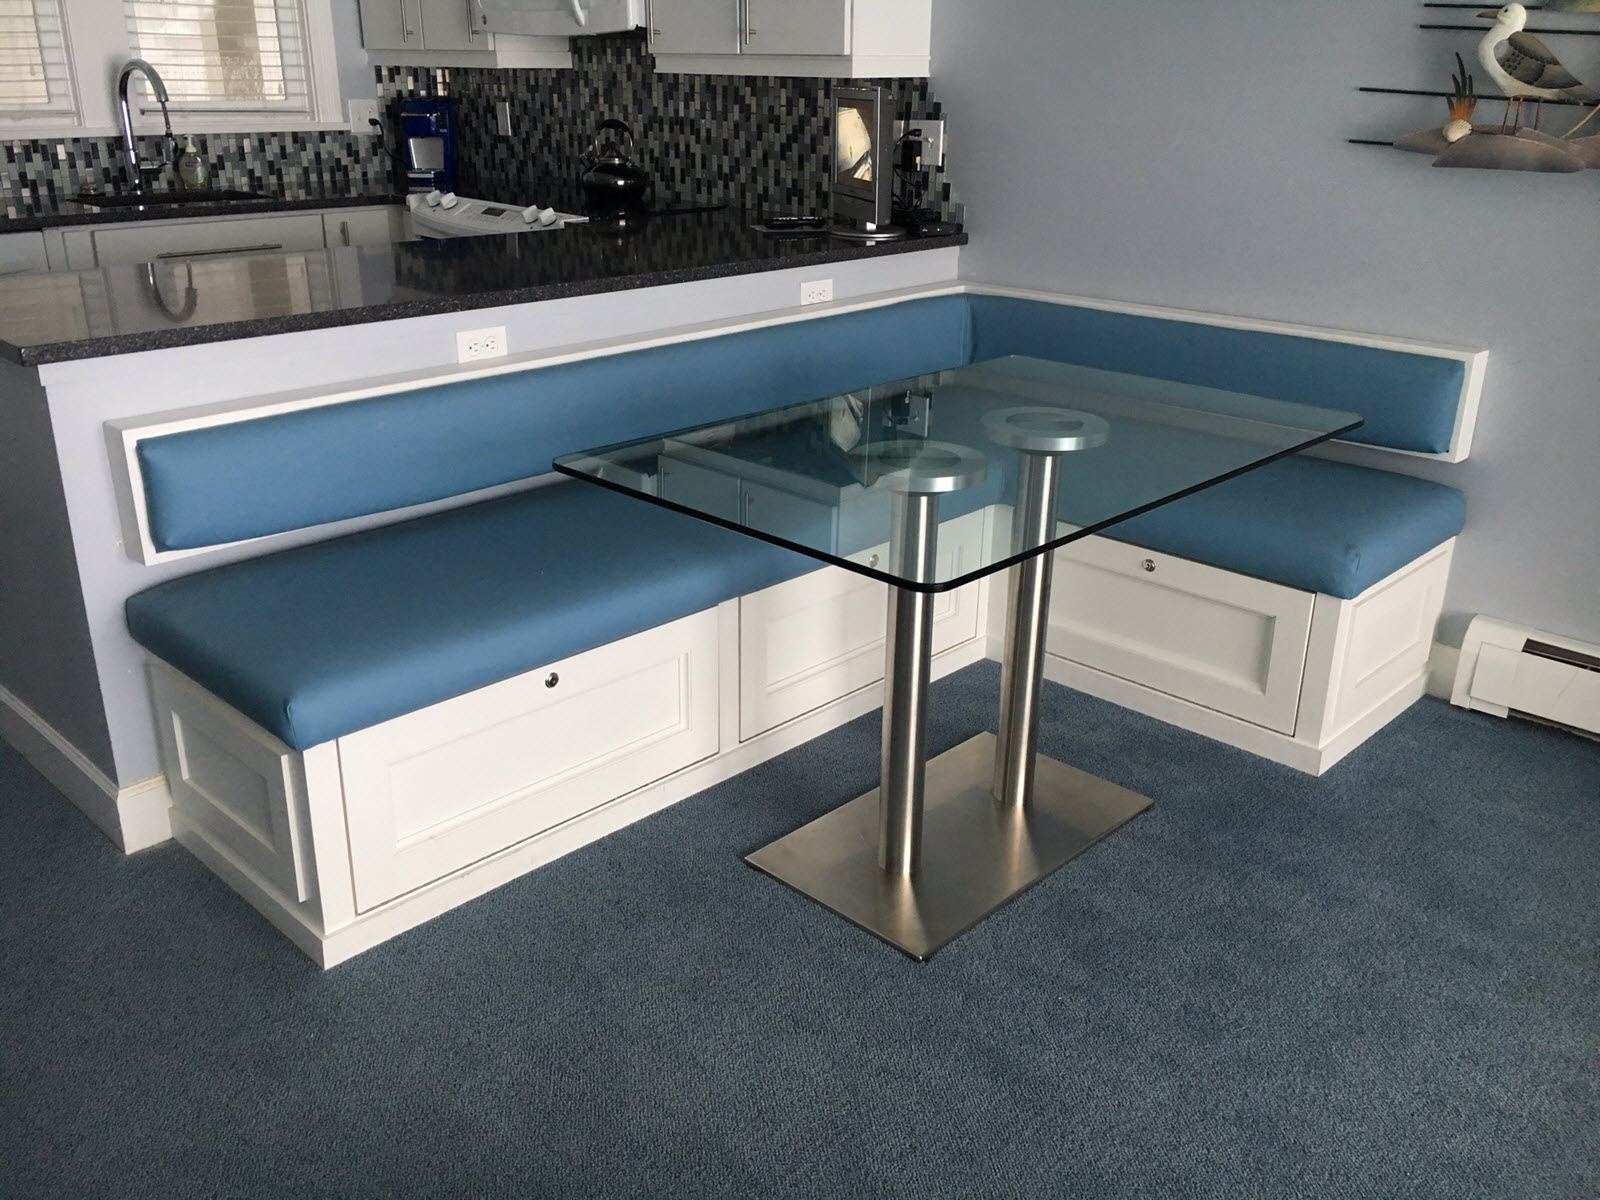 A nice bench seating dining area. This customer picked a beautiful blue that really enhanced the space.